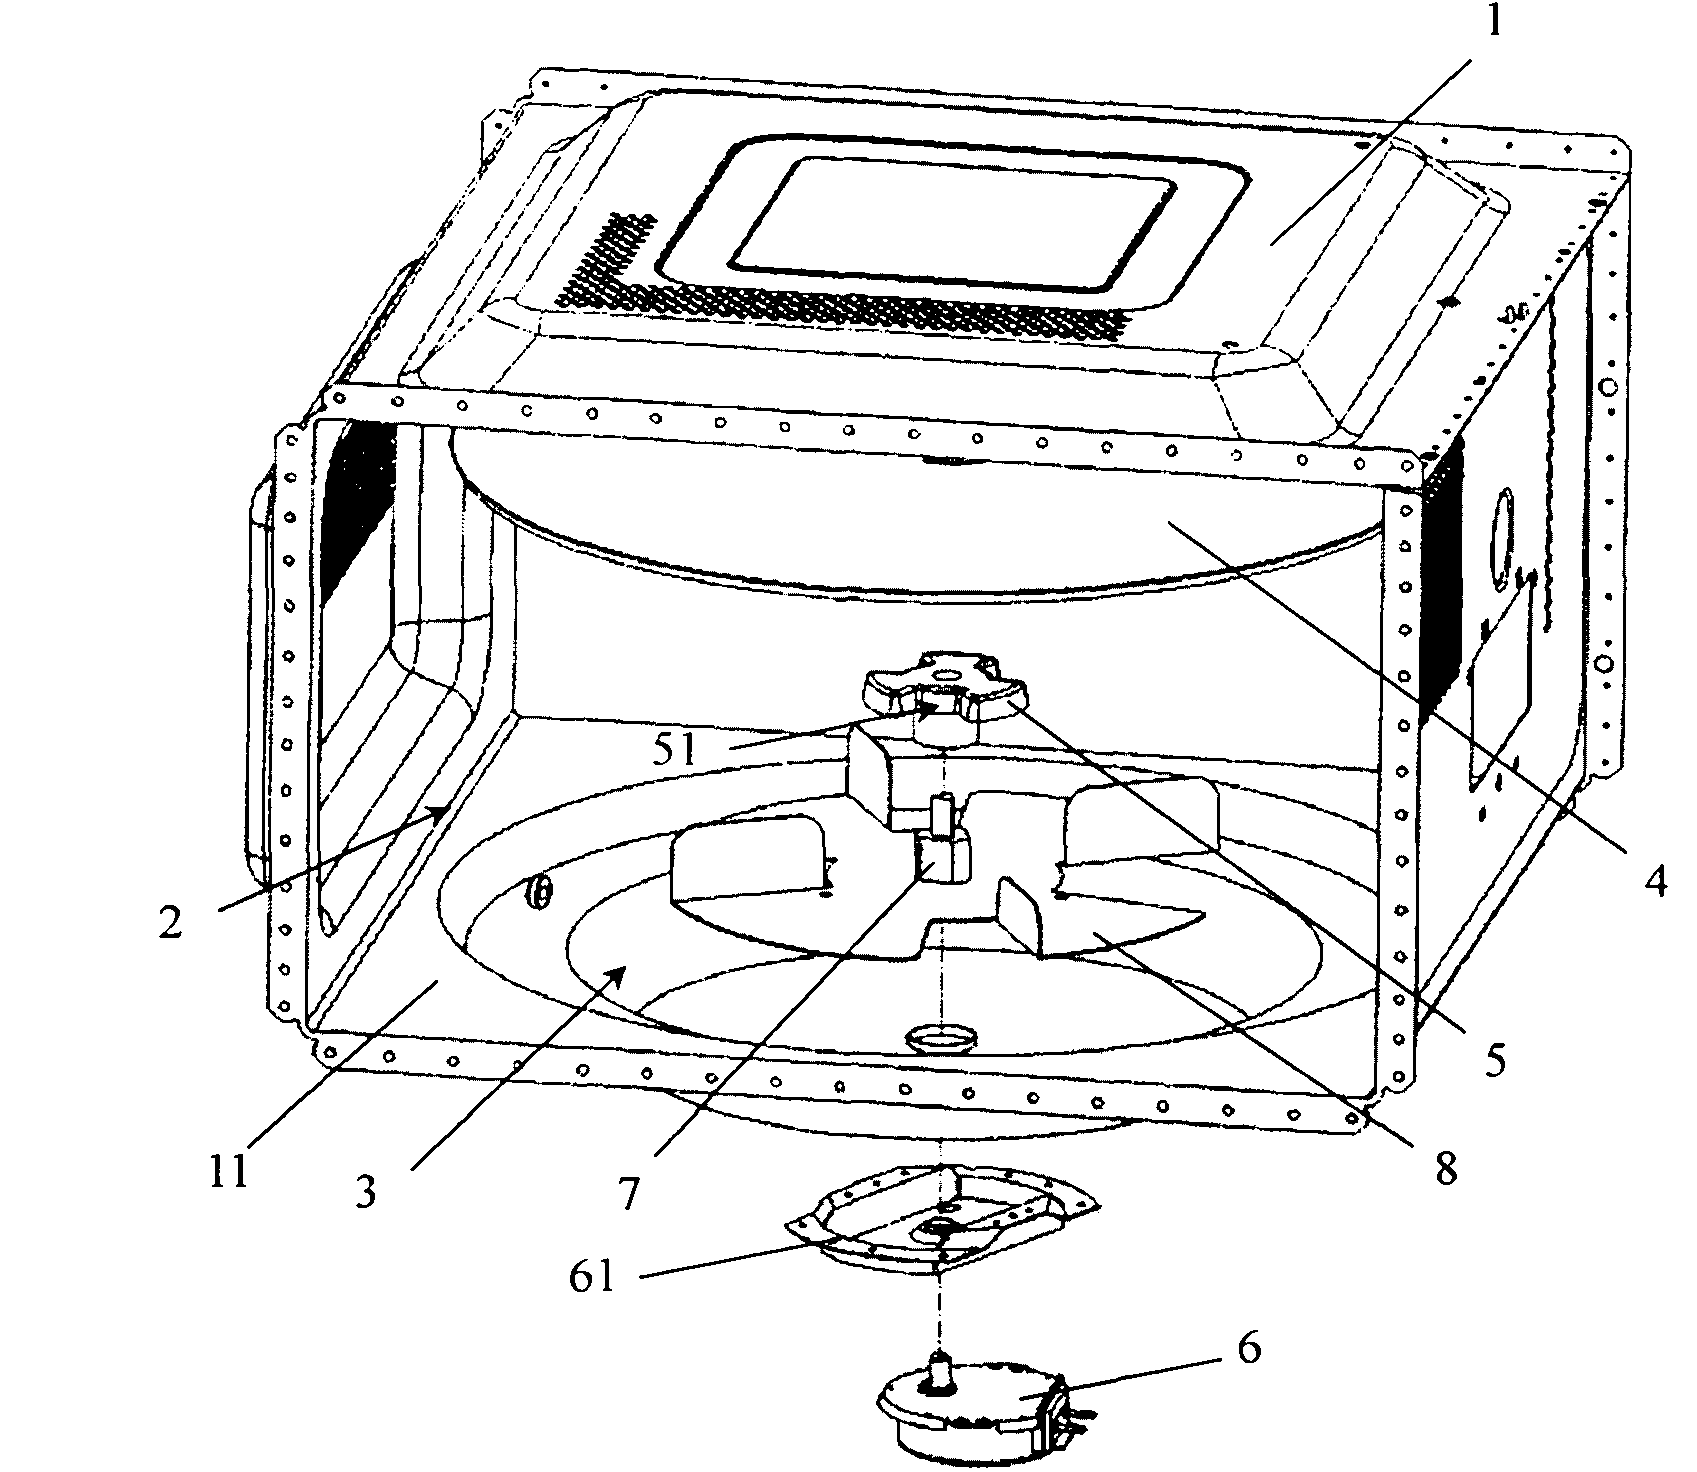 Microwave oven with novel rotating disk structure